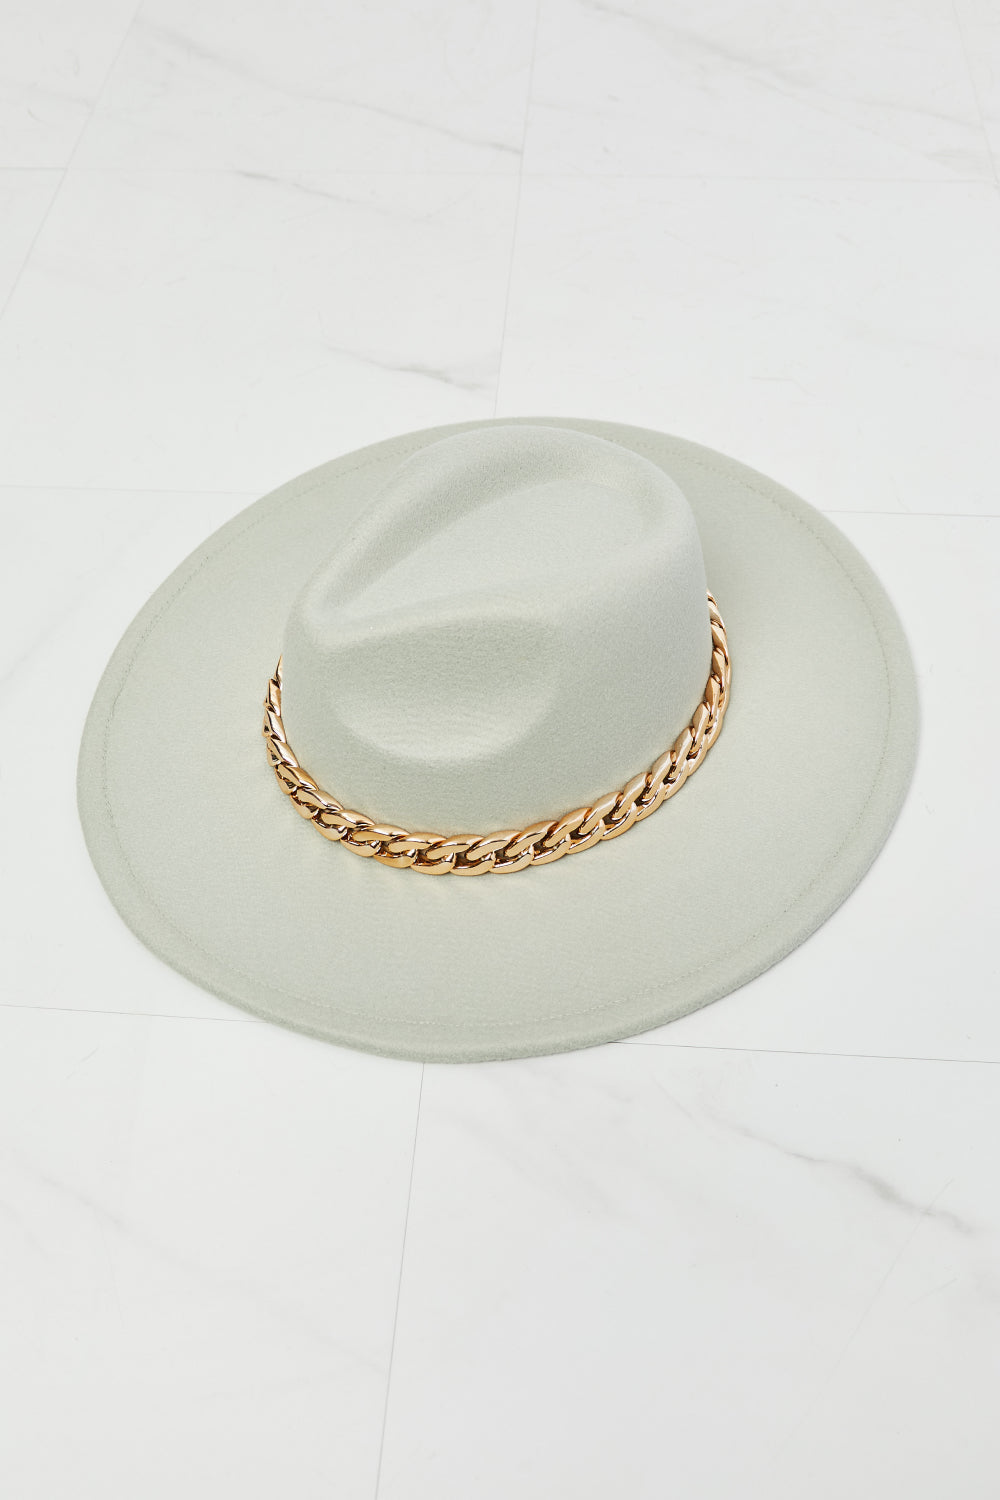 Fame Keep Your Promise Fedora Hat in Mint - TiffanyzKlozet